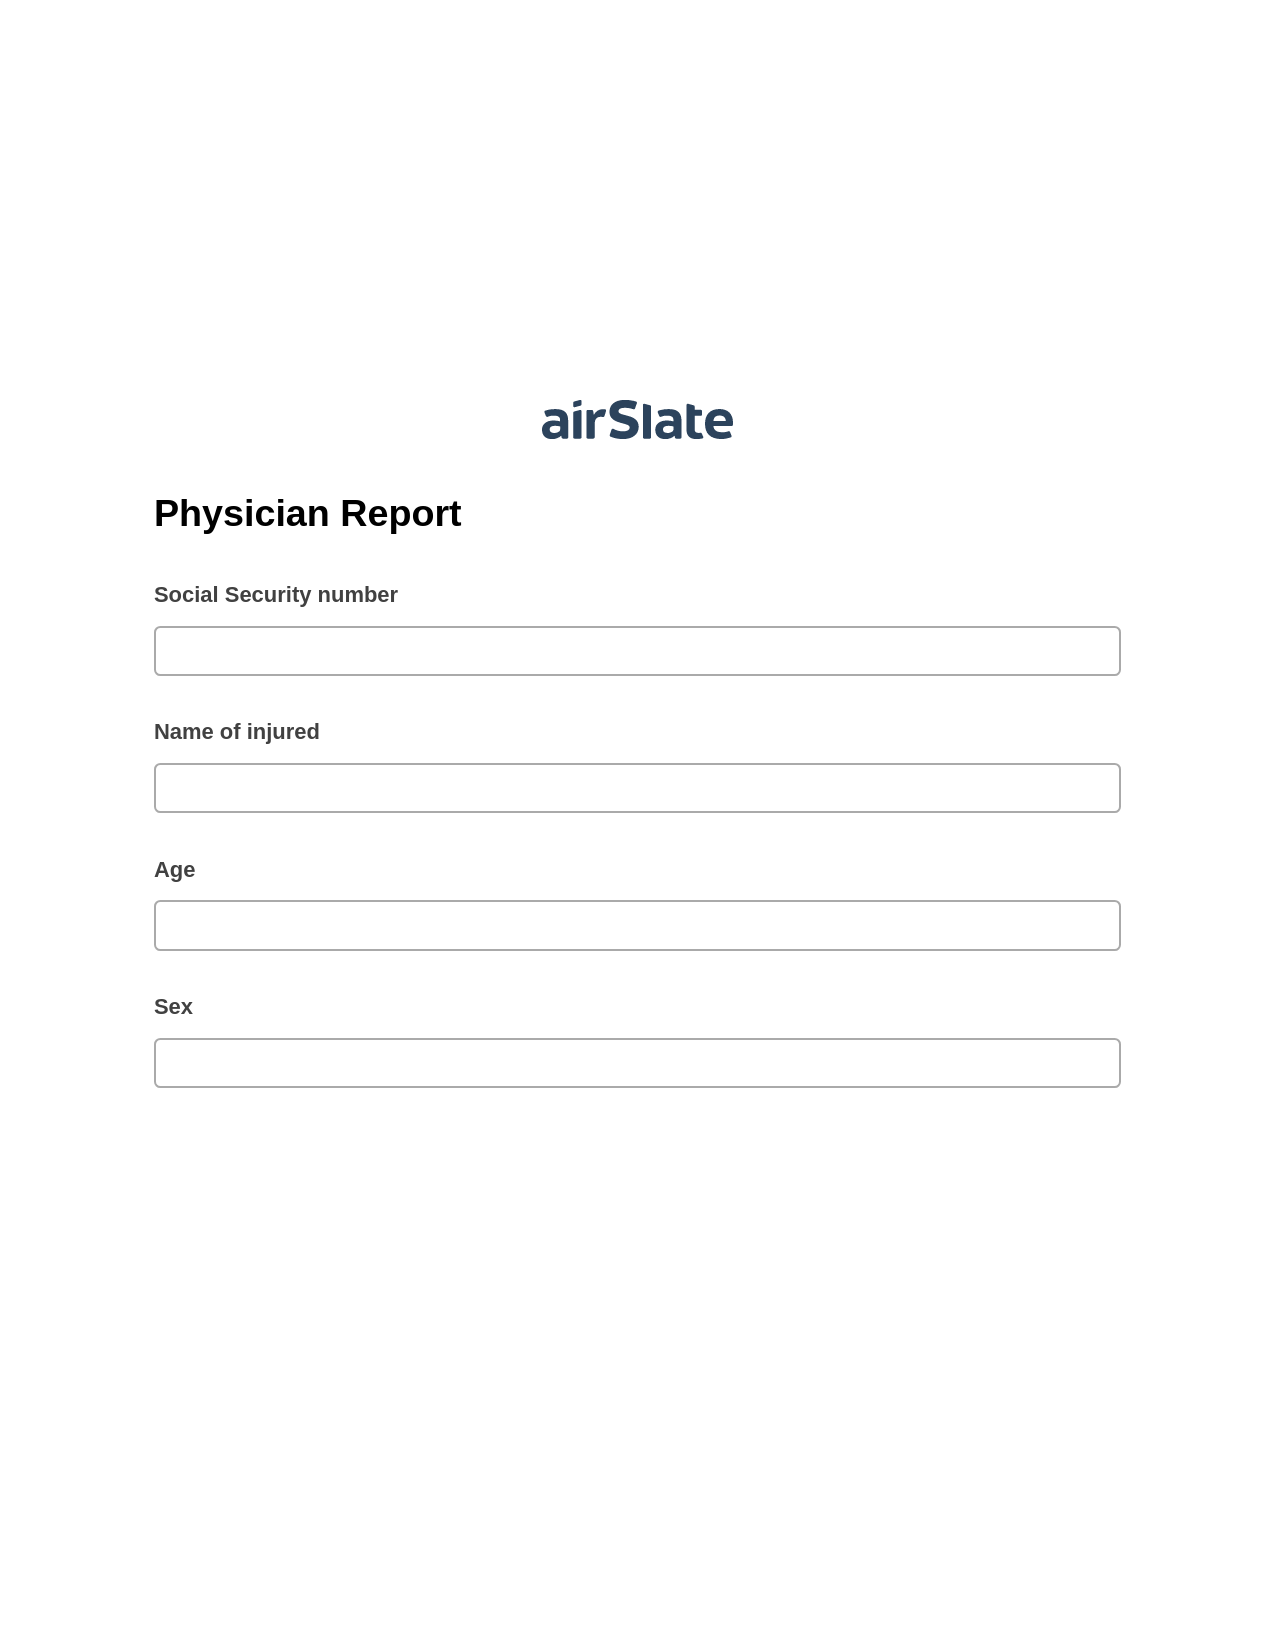 Physician Report Pre-fill from CSV File Bot, Send Mailchimp Campaign Bot, Archive to Google Drive Bot